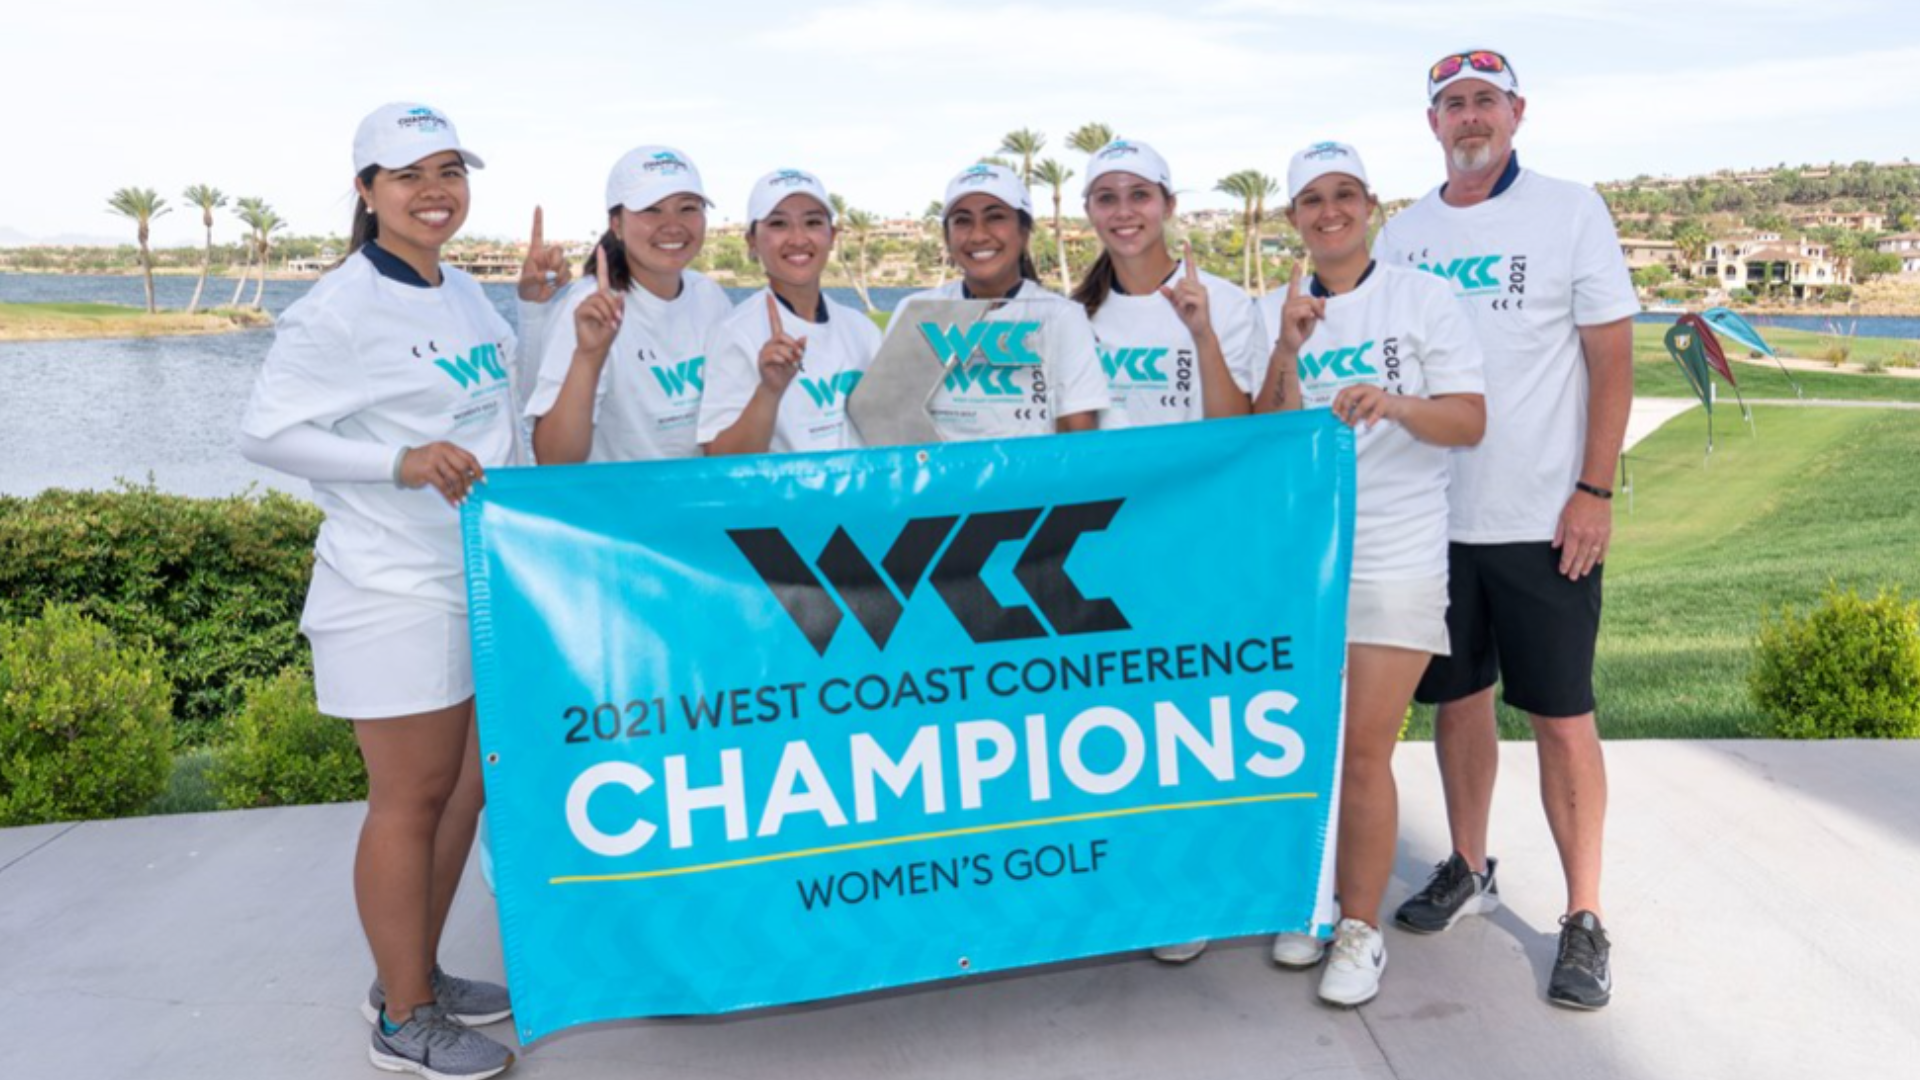 Gonzaga women's golf claimed their first ever conference championship on Saturday in dramatic fashion. They now wait to see if they make NCAA Regionals.